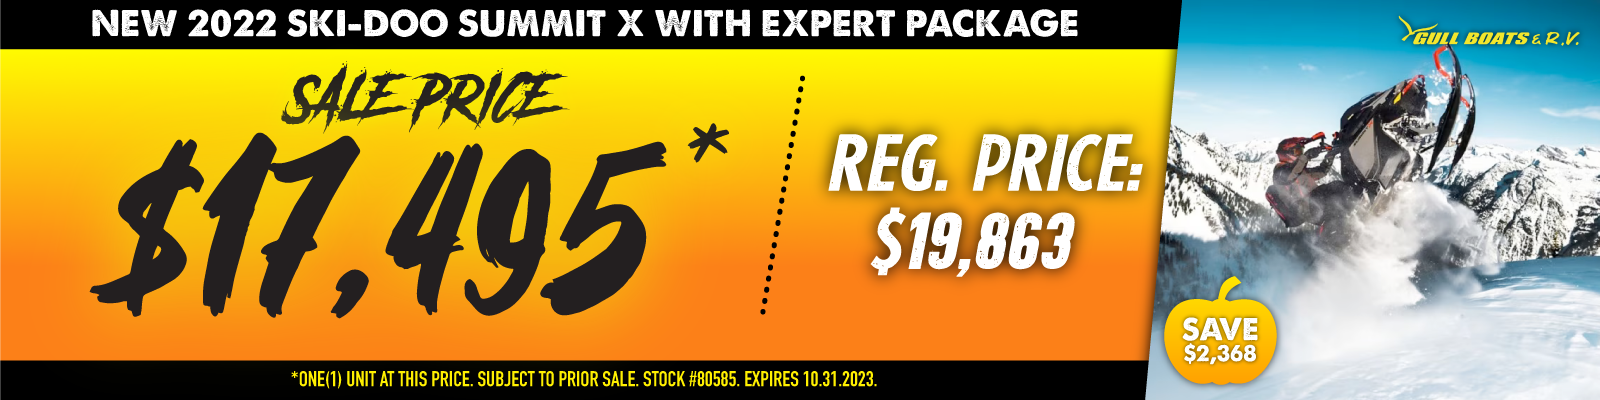 New 2022 Ski-Doo Summit X with Expert Package - $19,863